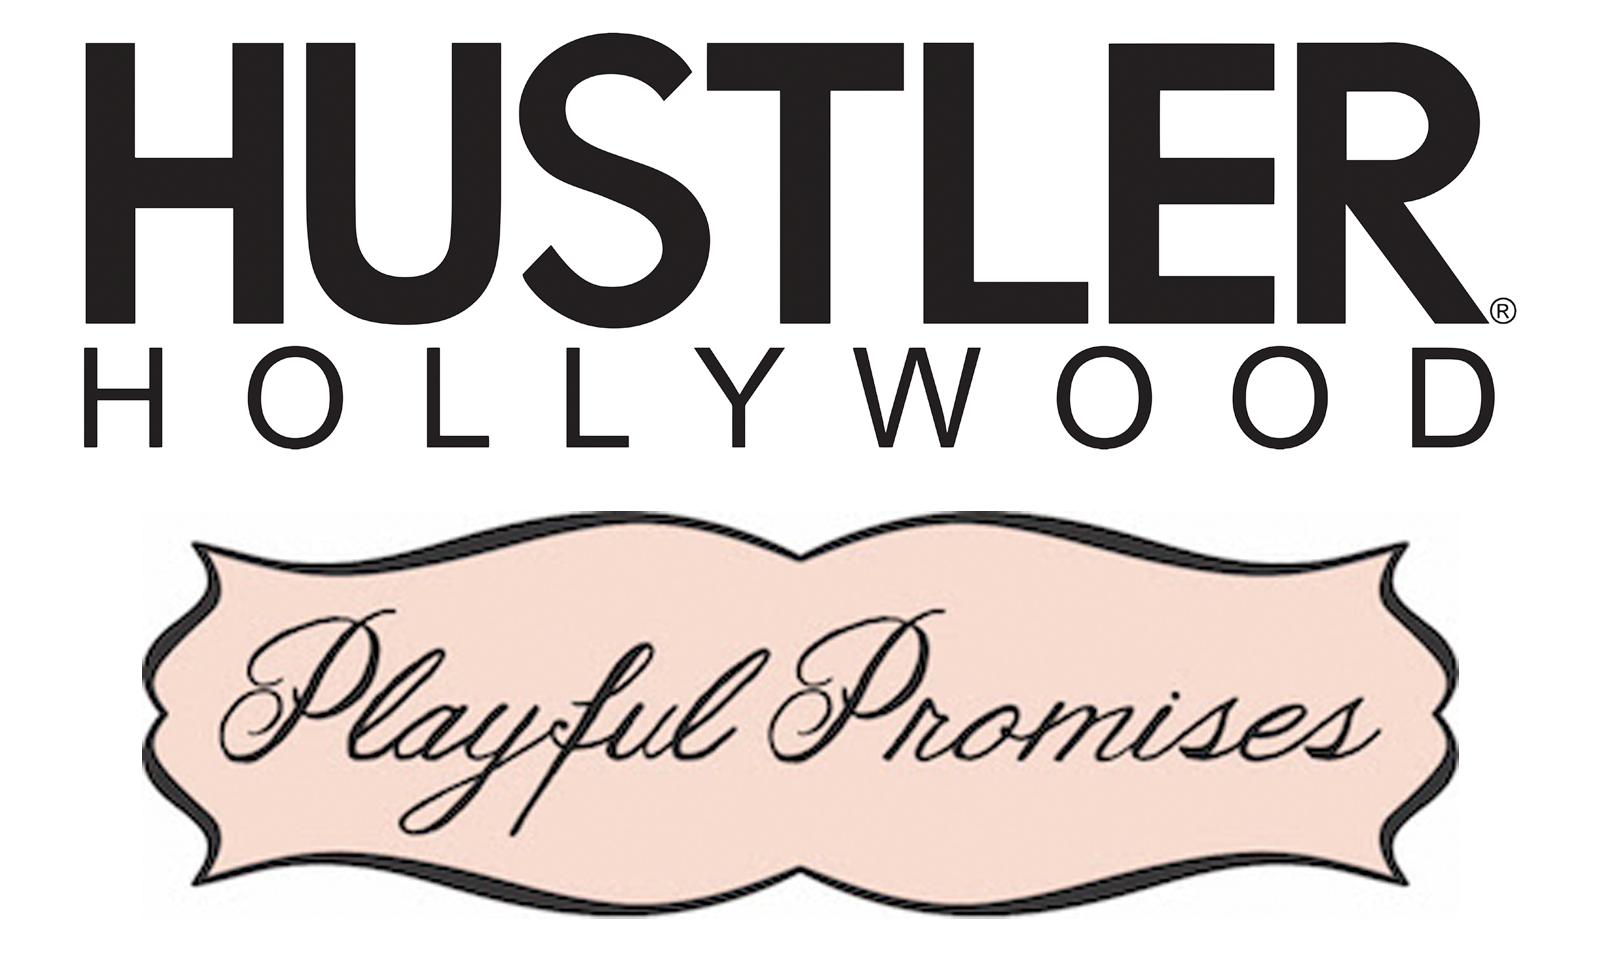 Hustler Inks Pact with Playful Promises for Lingerie, Sleepwear